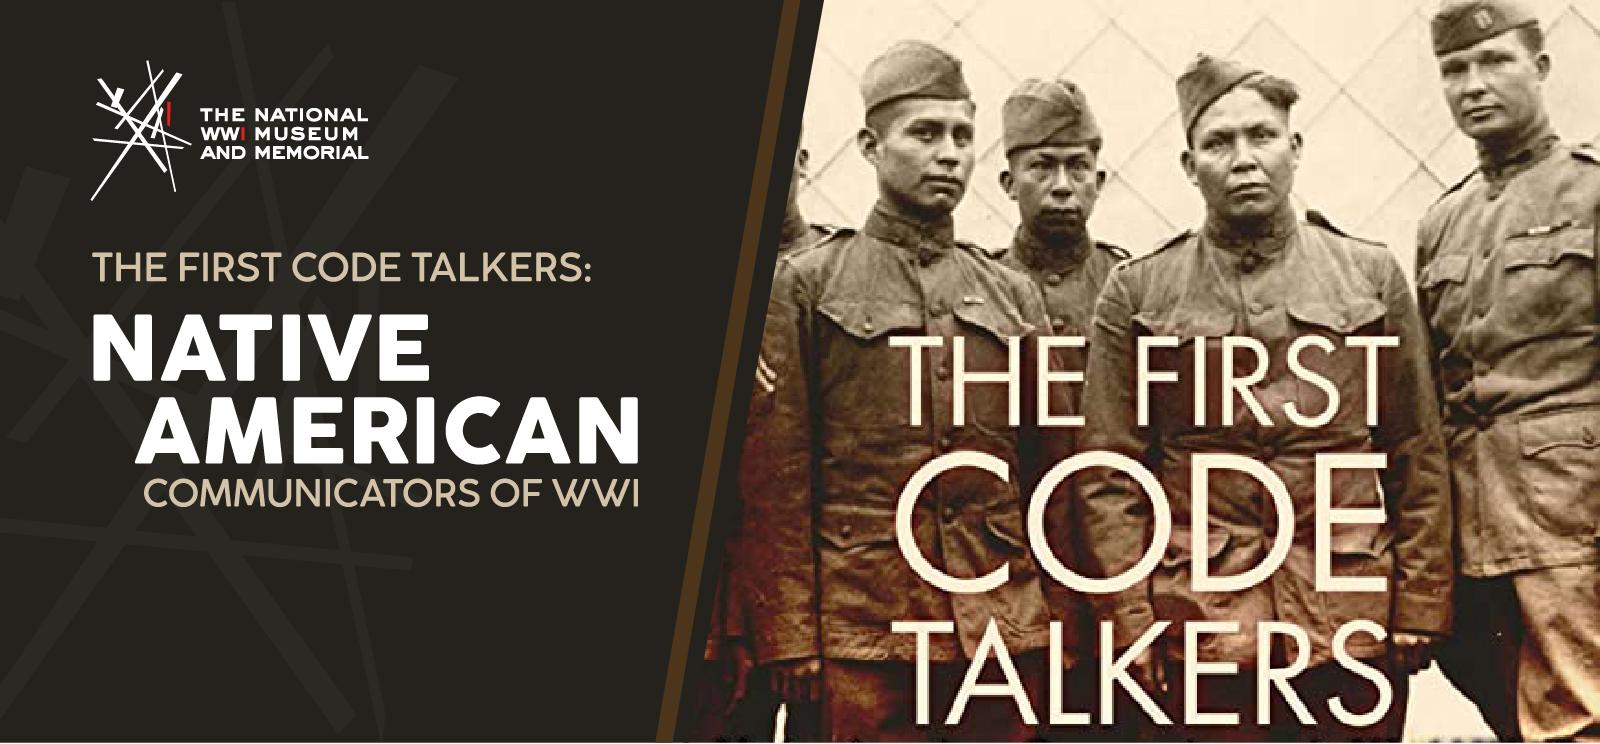 Image: Book cover depicting a group of Native American men in WWI uniform with the book title 'The First Code Talkers.' Text: 'The First Code Talkers: Native American Communicators of WWI'